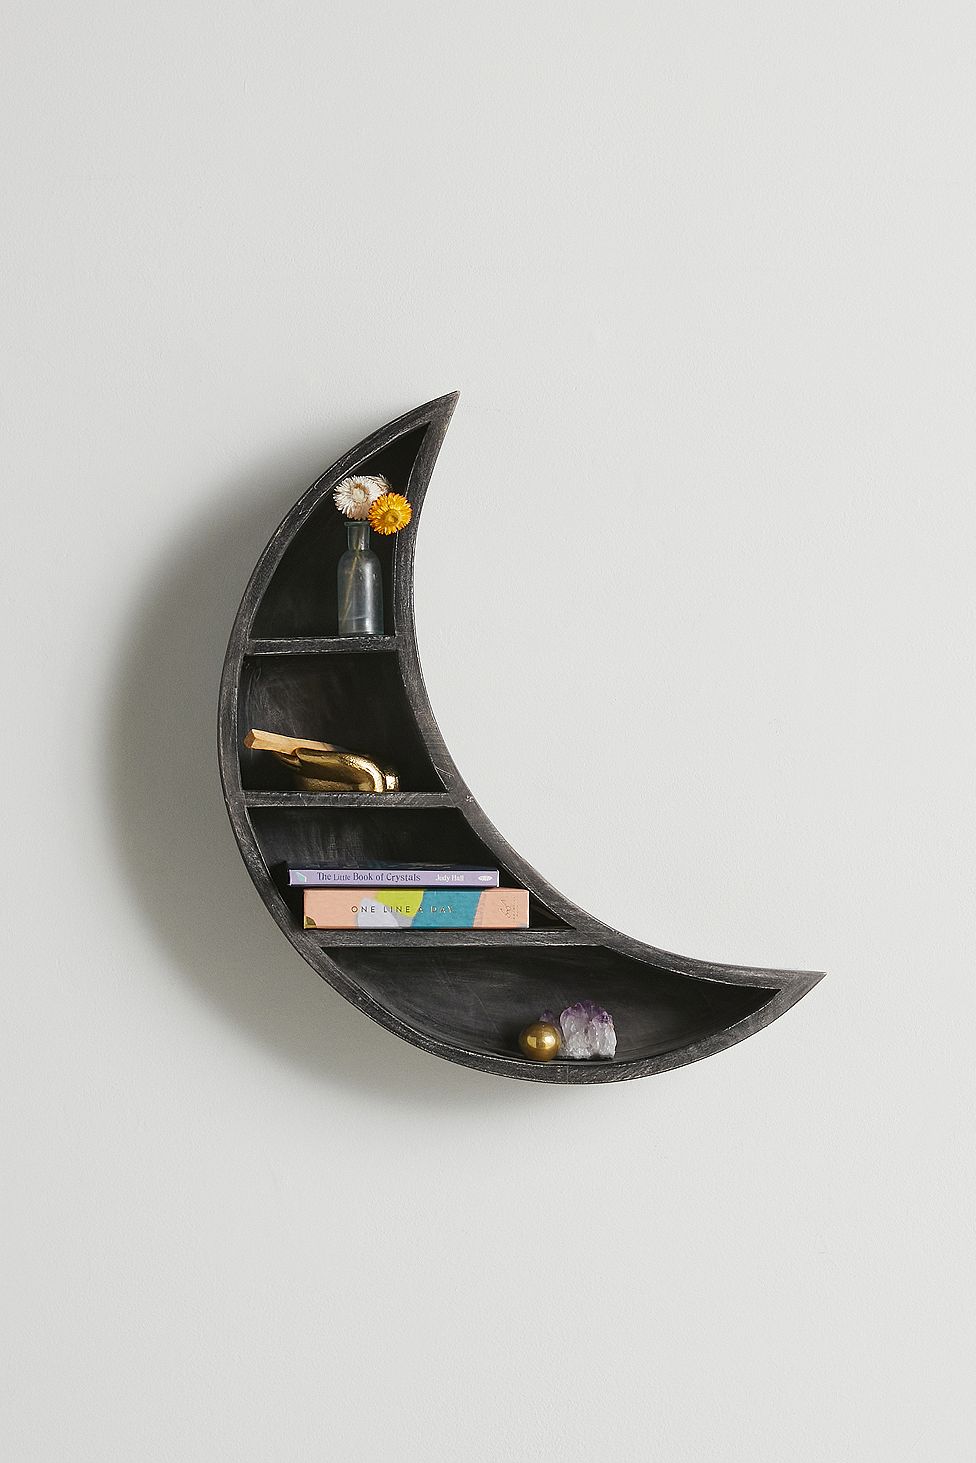 Urban Outfitters Crescent Moon Wall Shelf